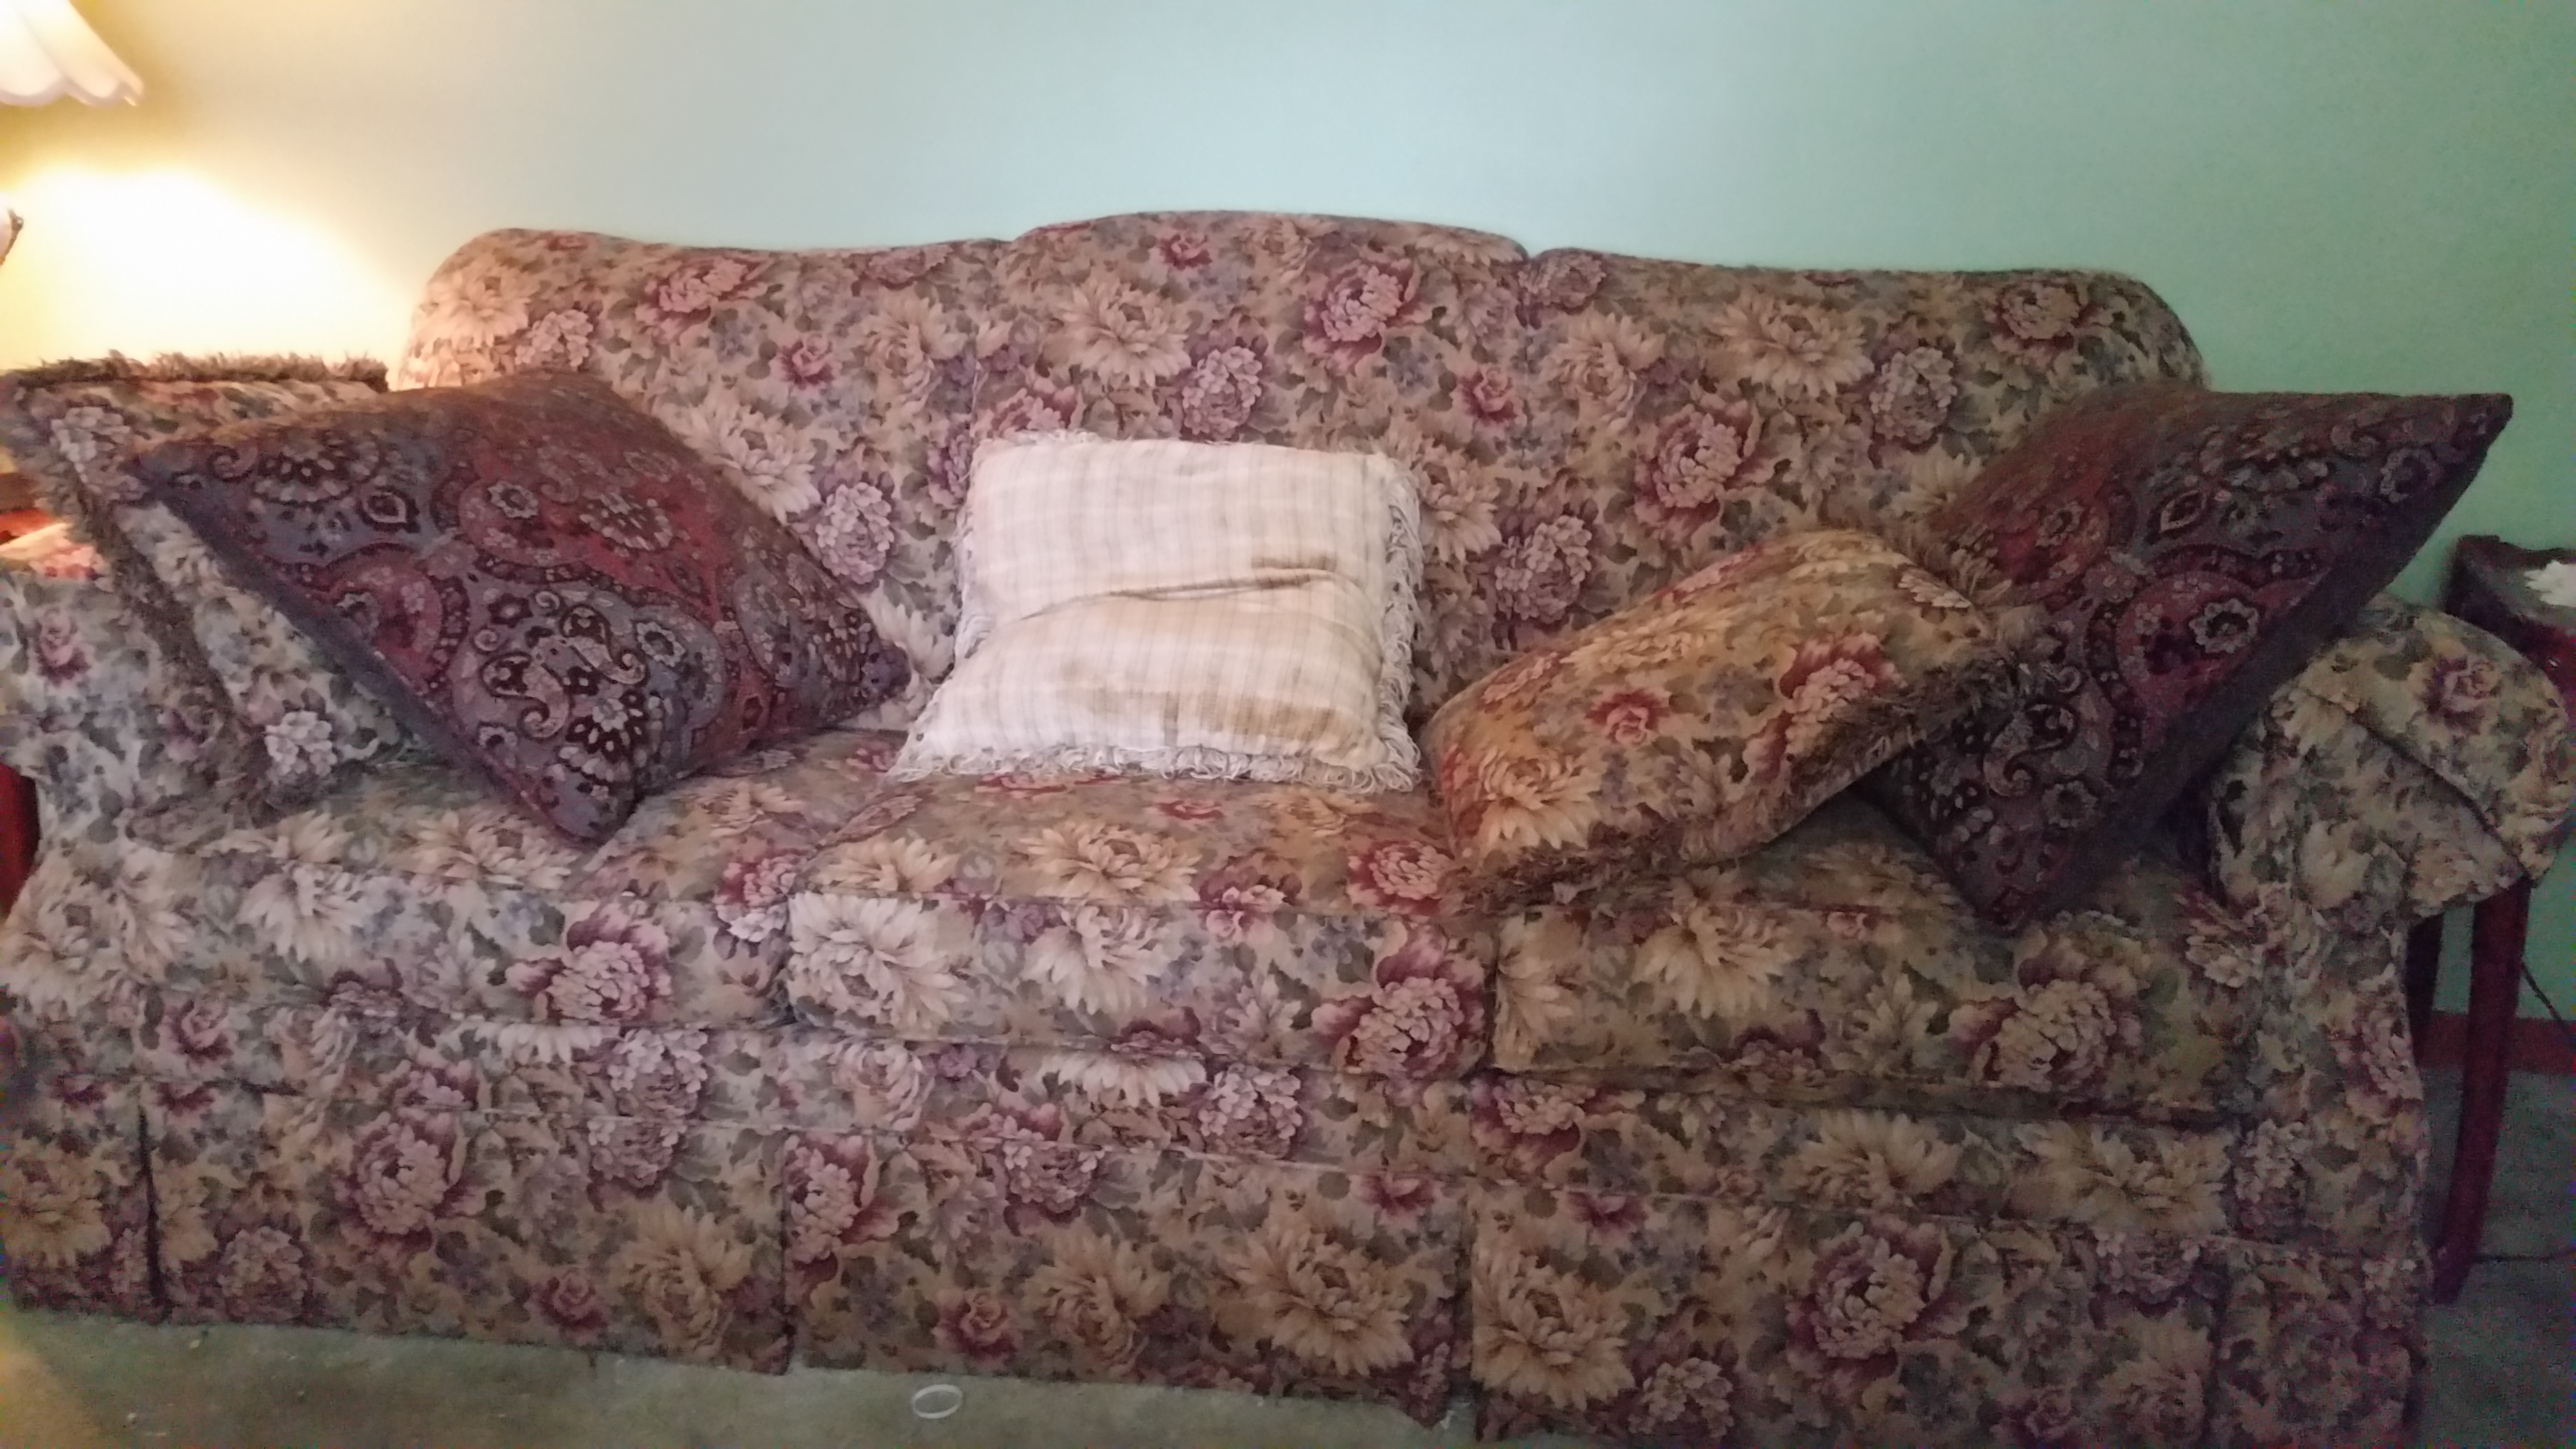 LAZBOY COUCH and CHAIR for sale in Niagara Falls NY